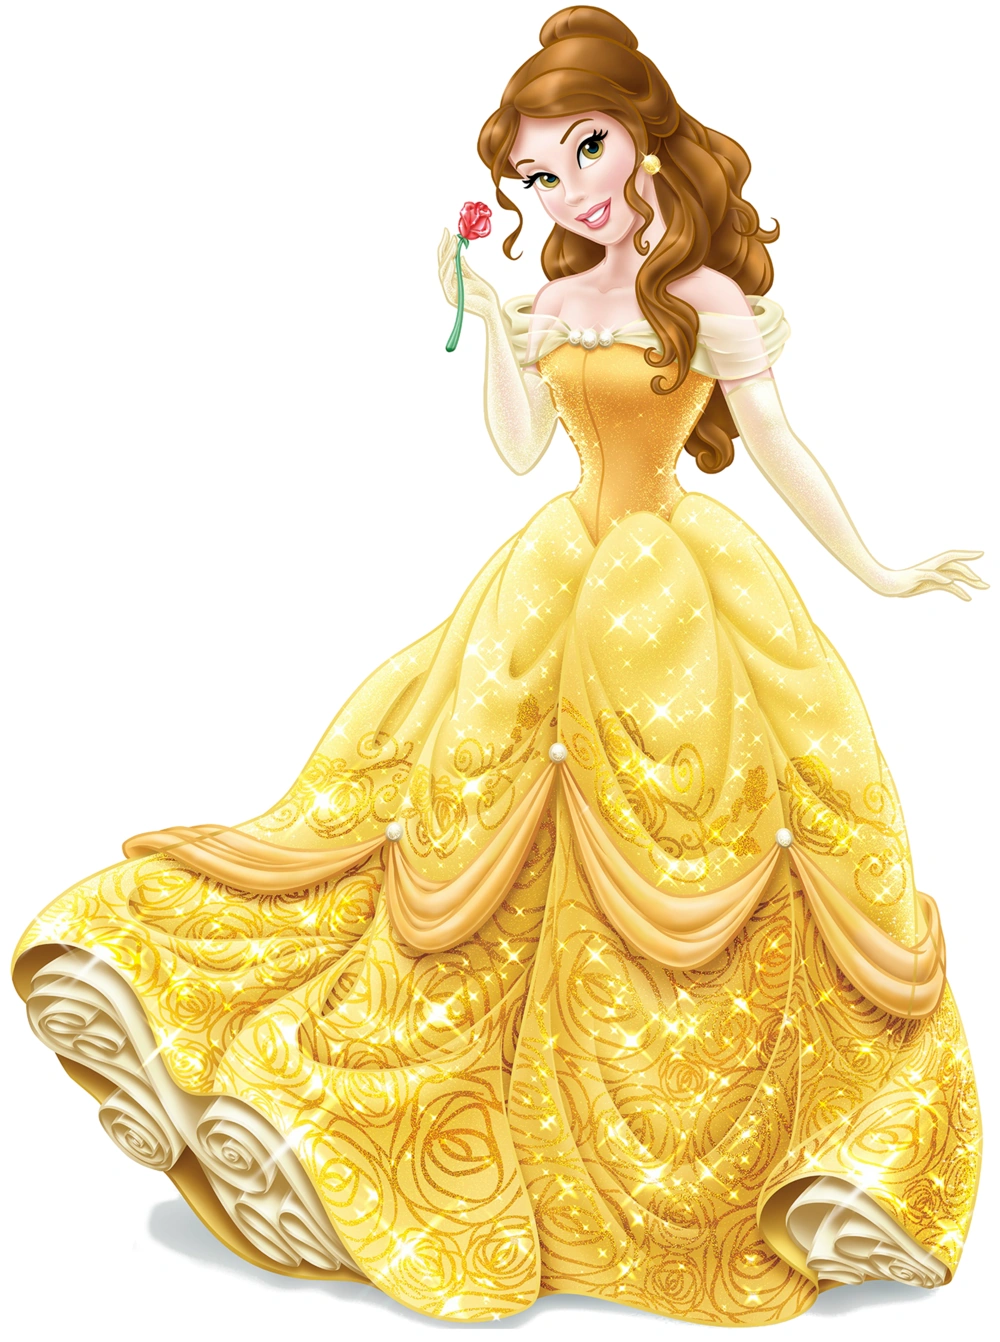 Top 999+ princess belle images – Amazing Collection princess belle images Full 4K